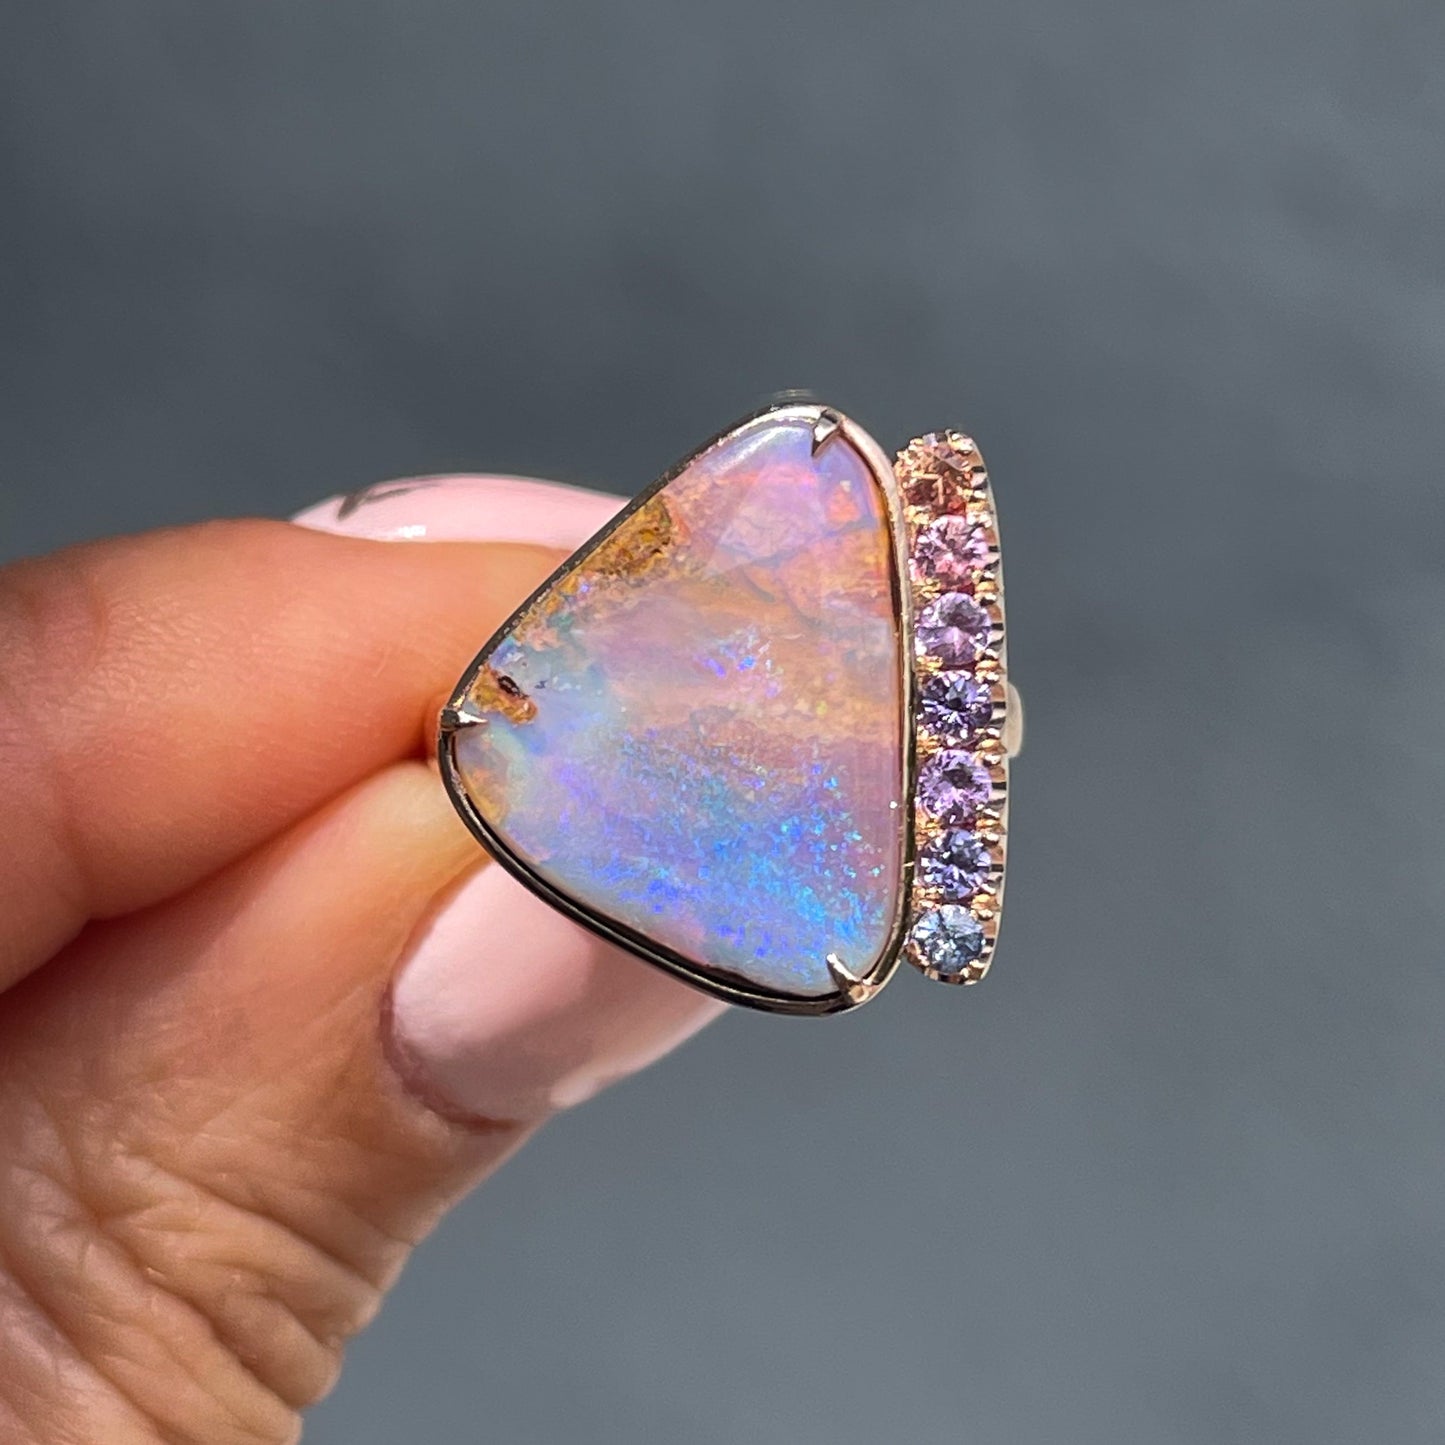 An Australian Opal Ring by NIXIN Jewelry held in front of a grey backdrop. The ring is made with a Boulder Opal and ombré sapphires.